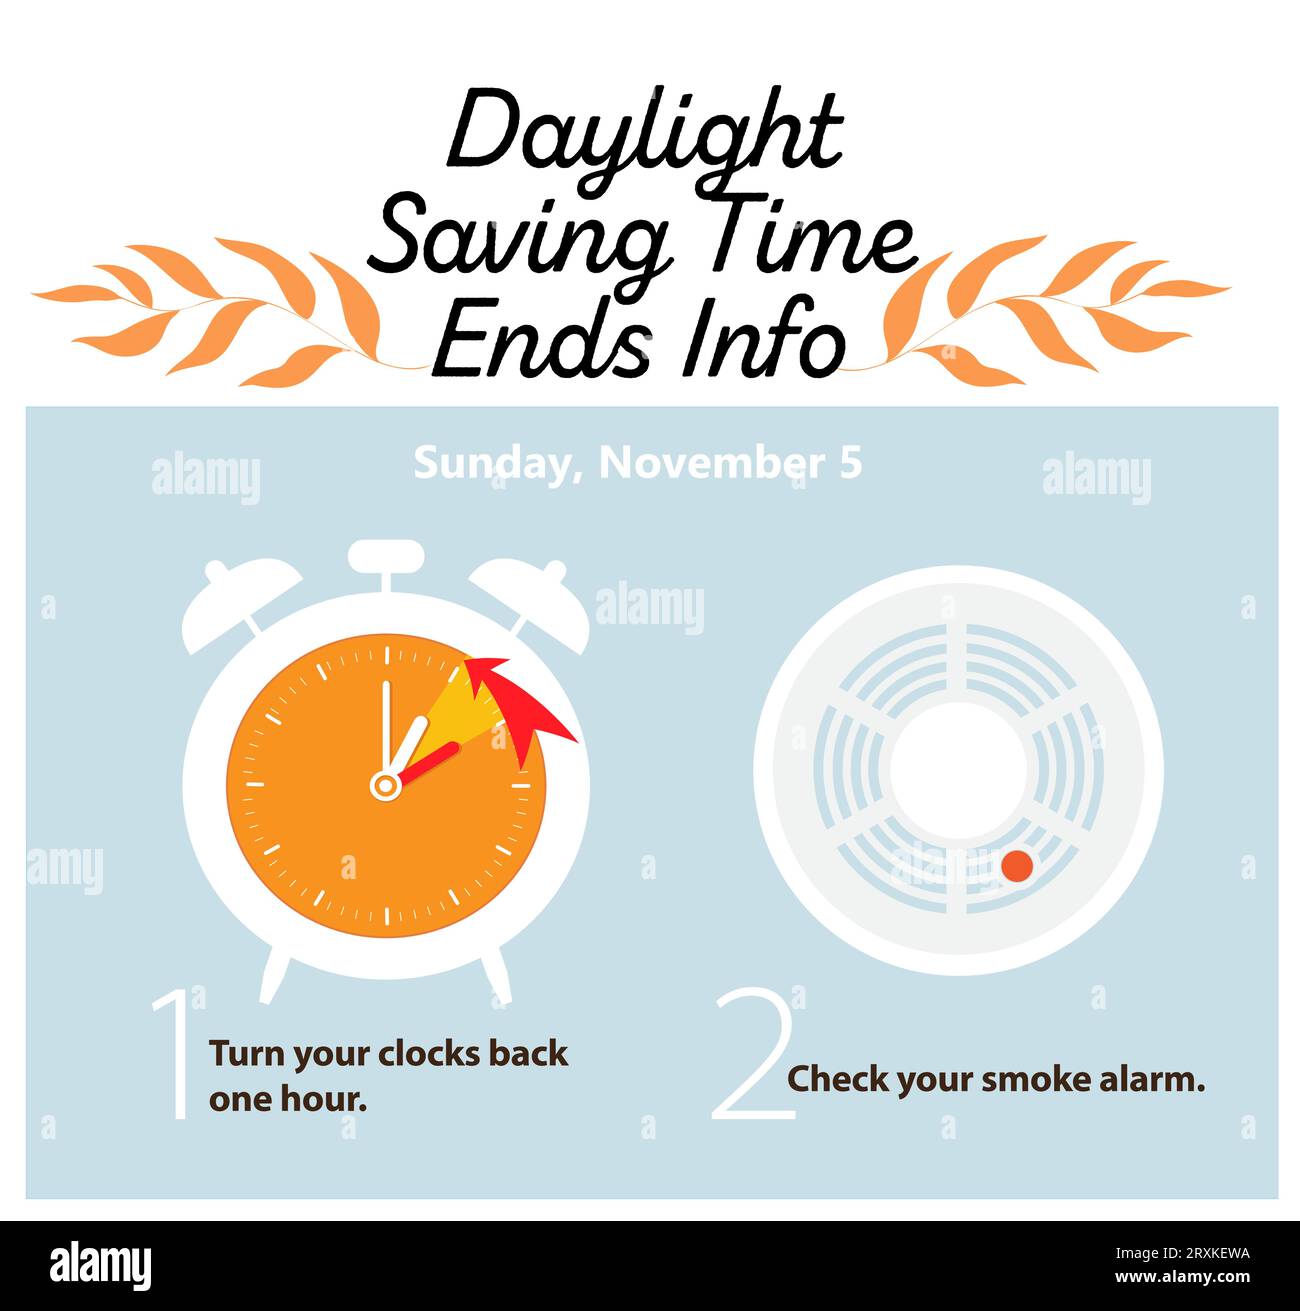 Get ready to turn clocks back one hour as daylight saving time ends